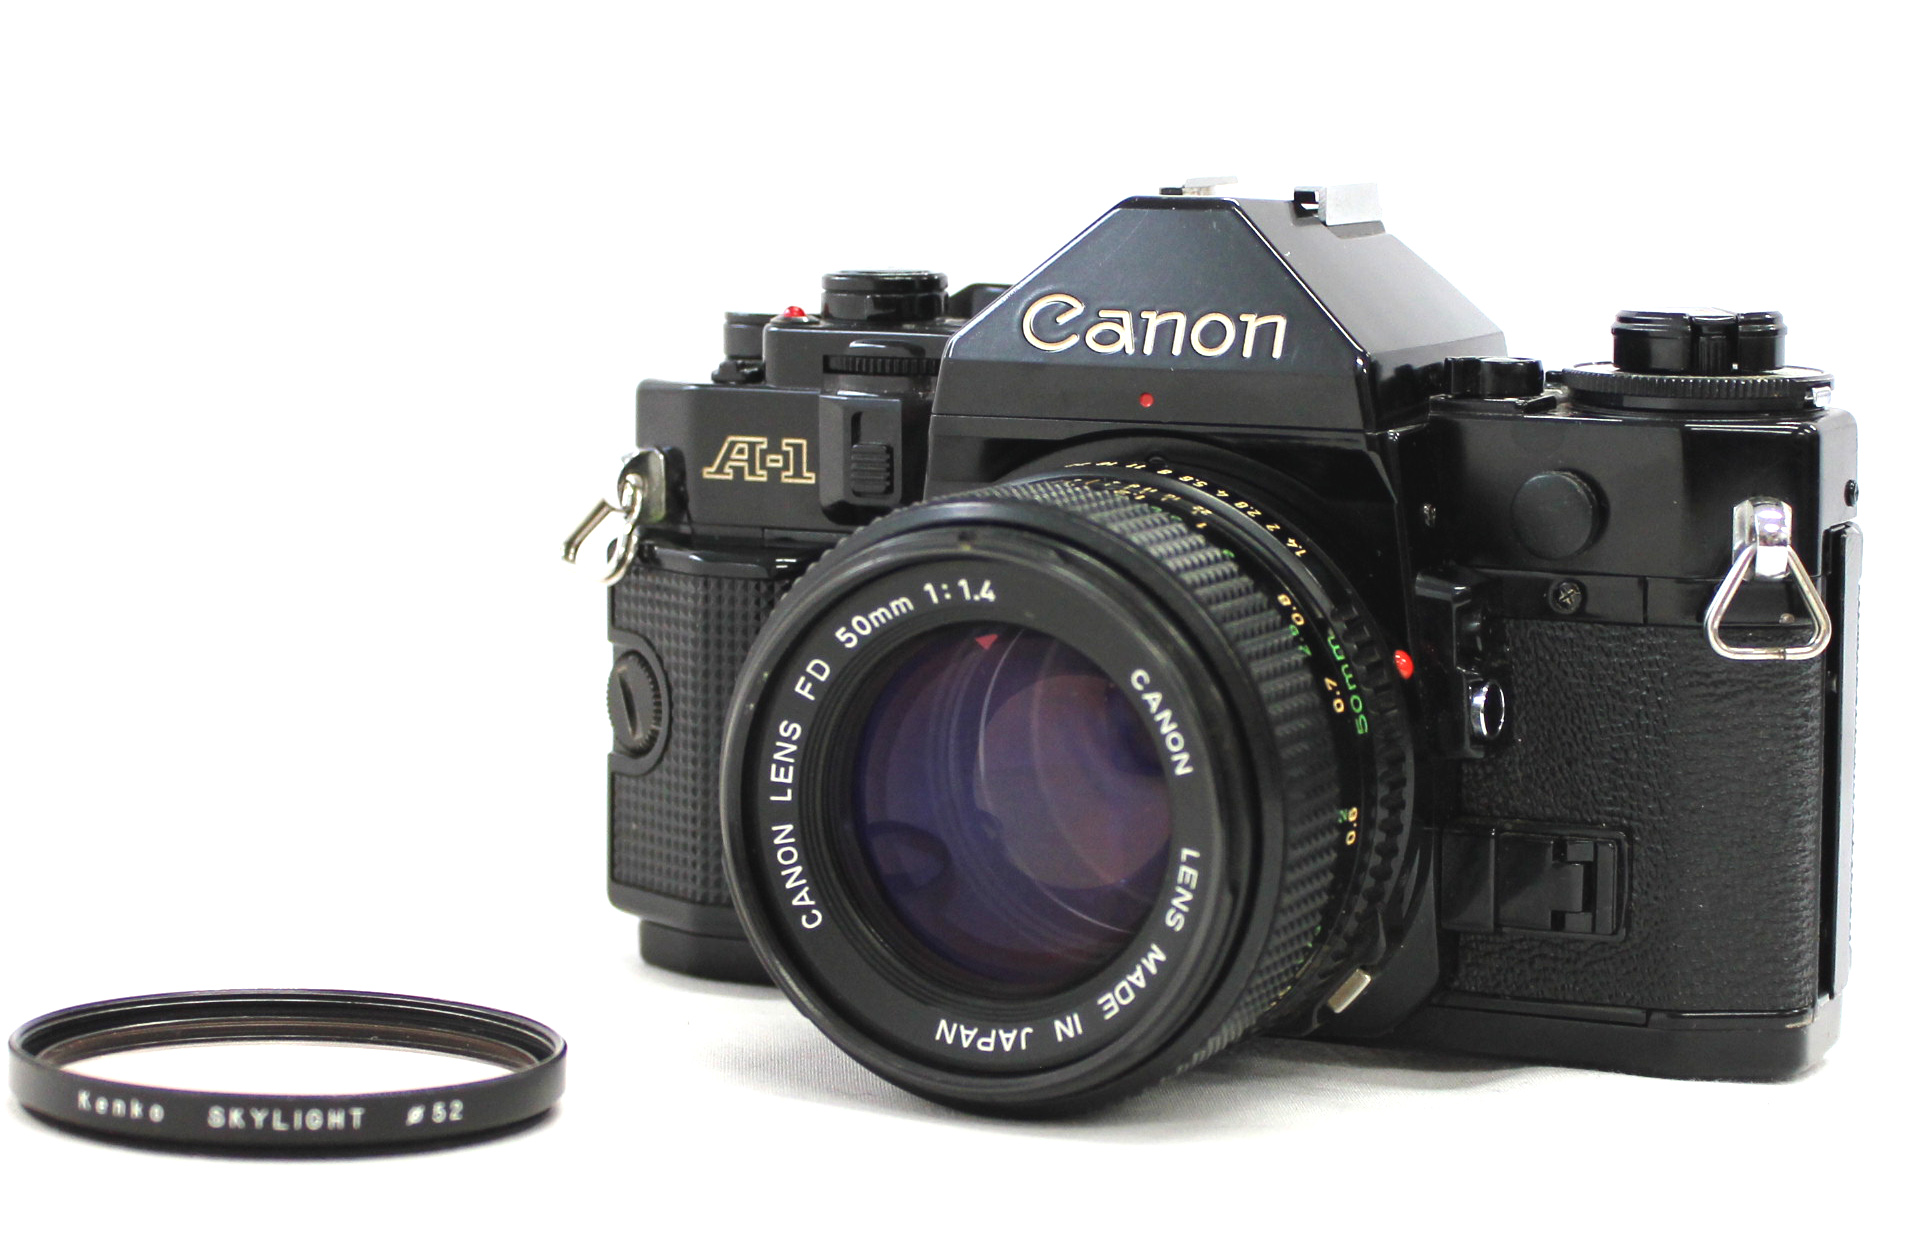 Japan Used Camera Shop | [Exc+++++] Canon A-1 35mm SLR Film Camera with New FD 50mm F/1.4 Lens from Japan